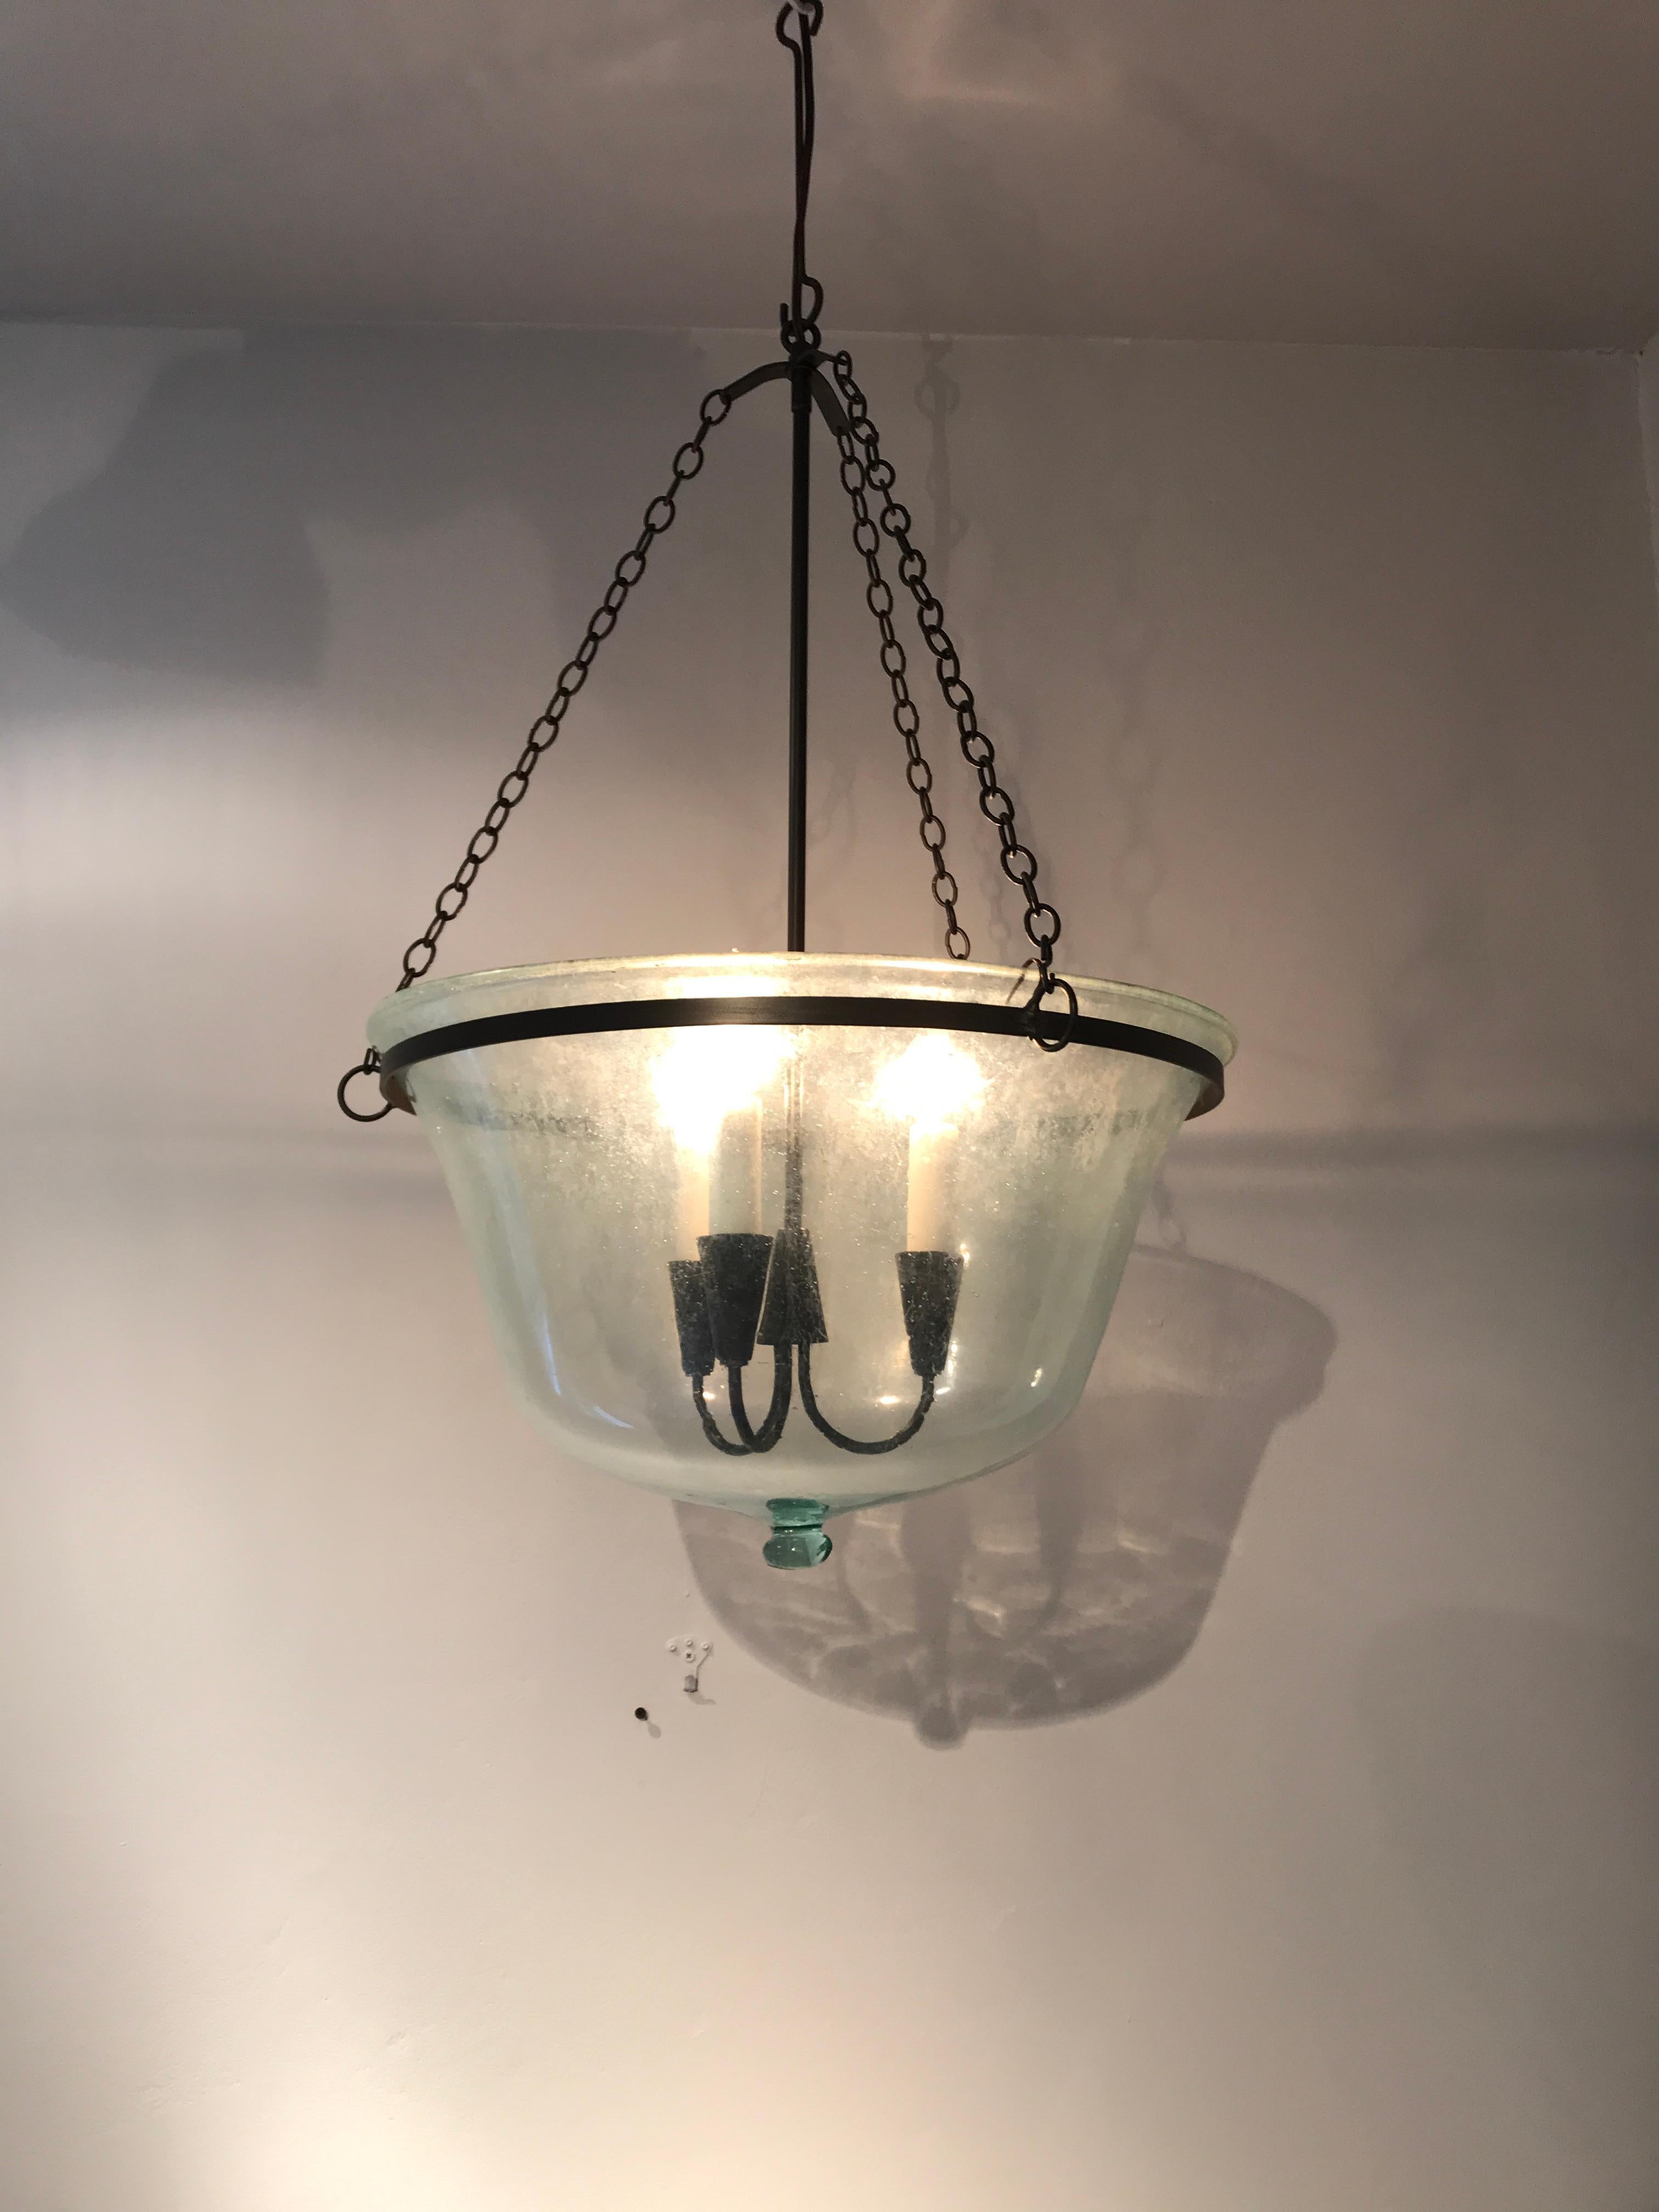 We have always had a thing for hand blown French garden cloches that come in two configurations: Bell form and melon form. This one is a melon cloche (a little shorter and wider than a bell cloche) and it has been converted into a hanging light with